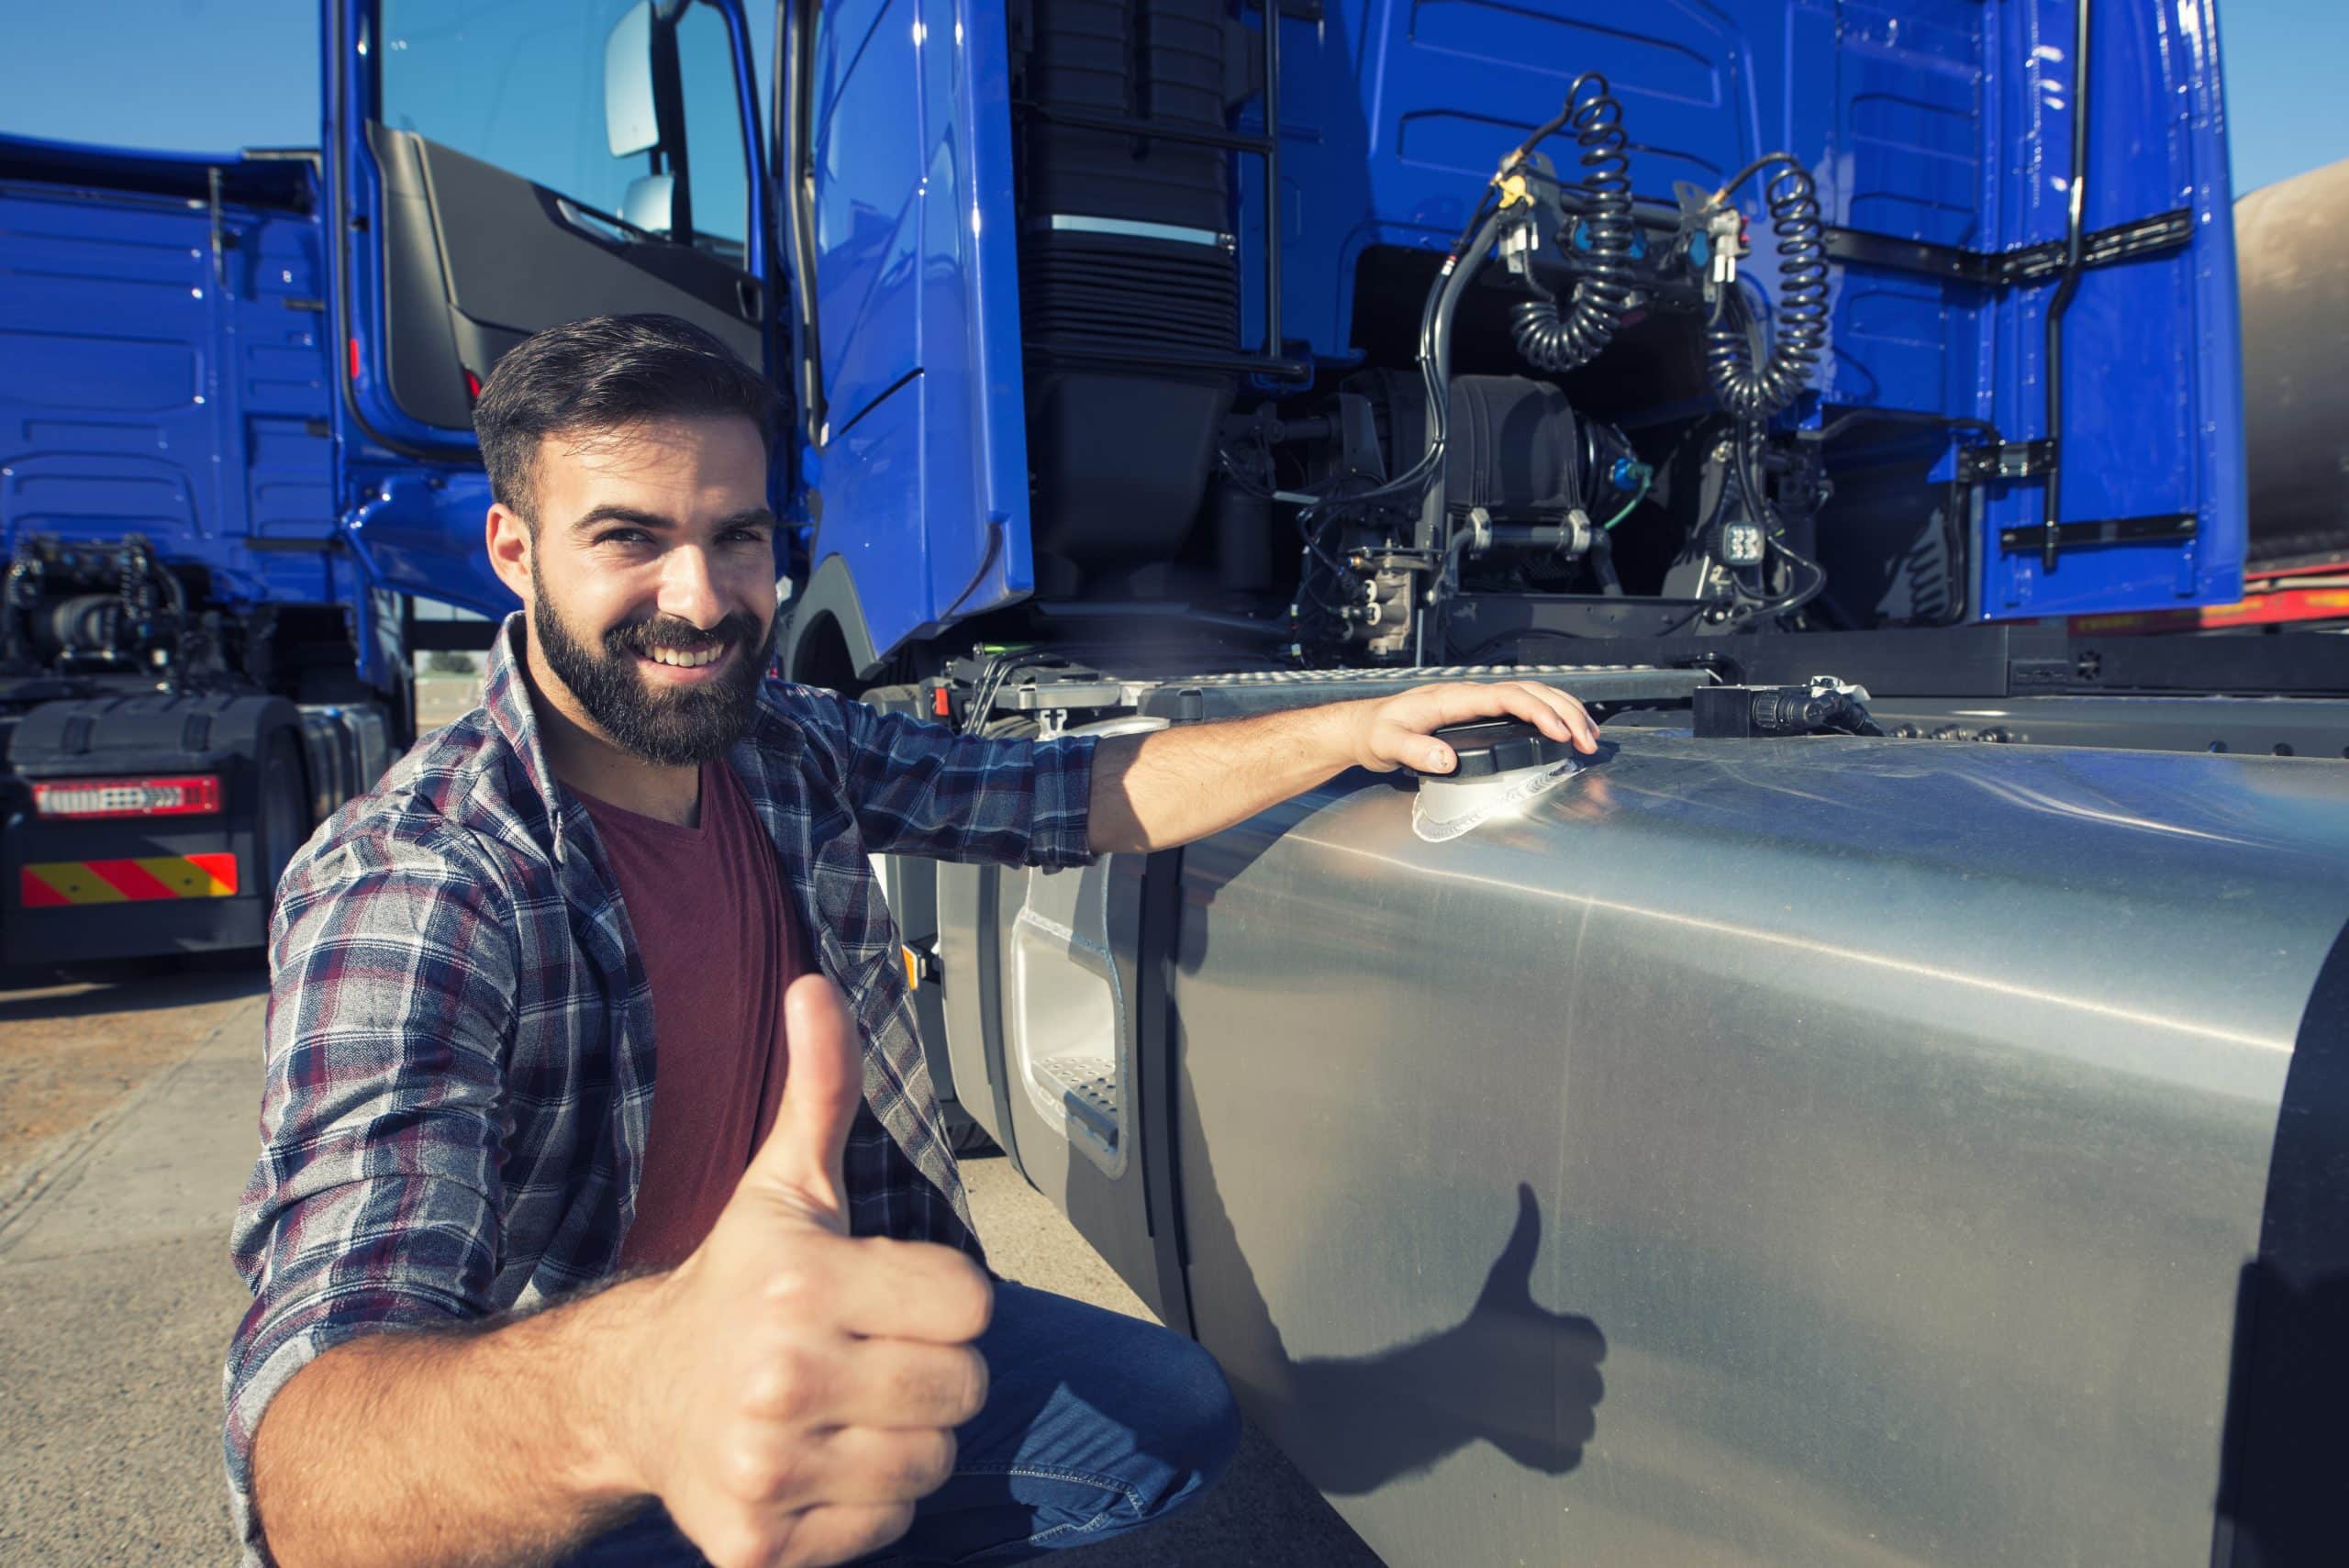 Factors to consider when choosing a truck wash system